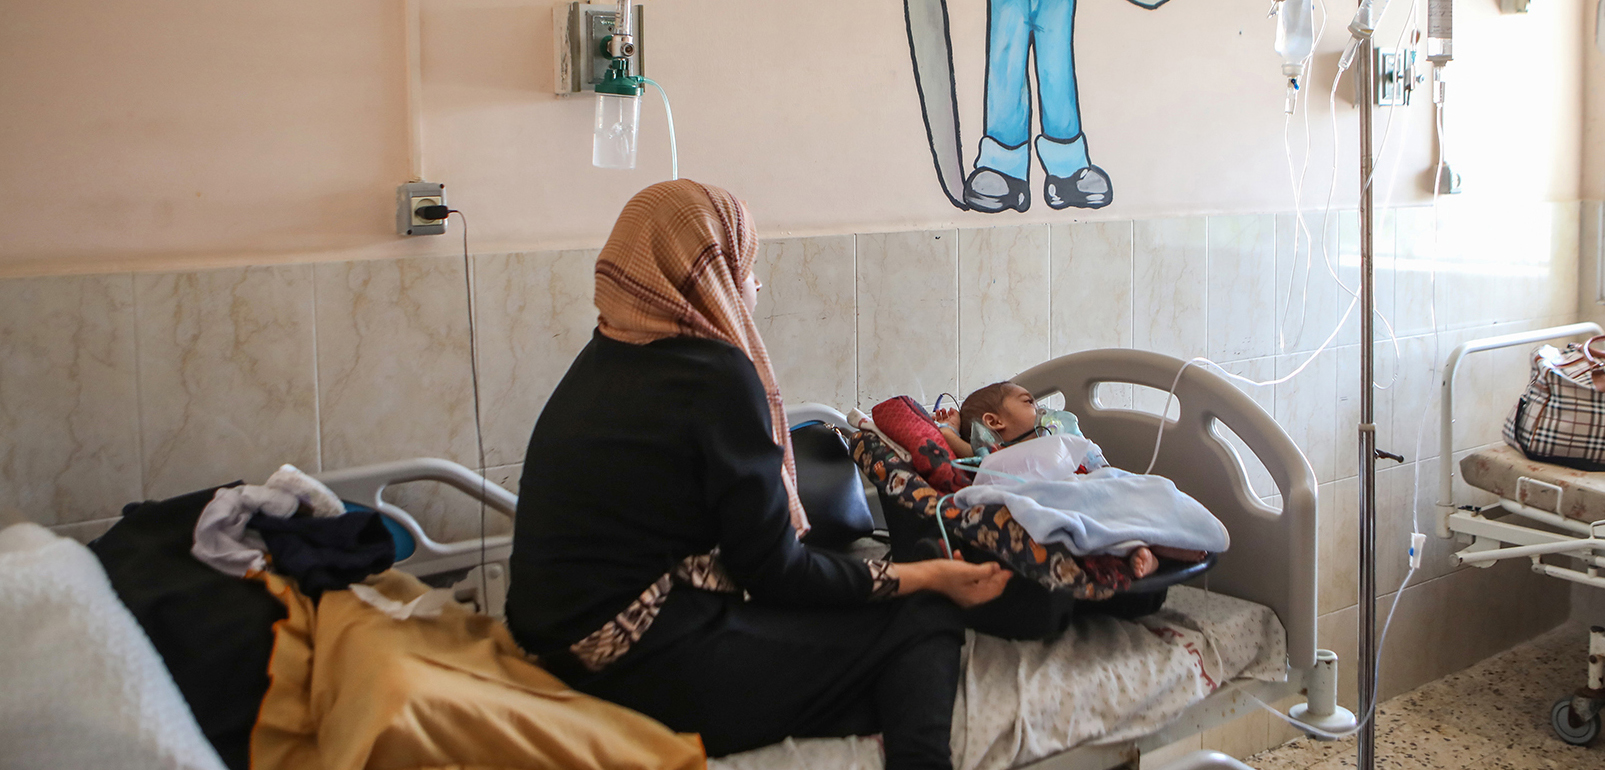 Patients in the Gaza Strip unable to obtain Israeli-issued permits to access the healthcare